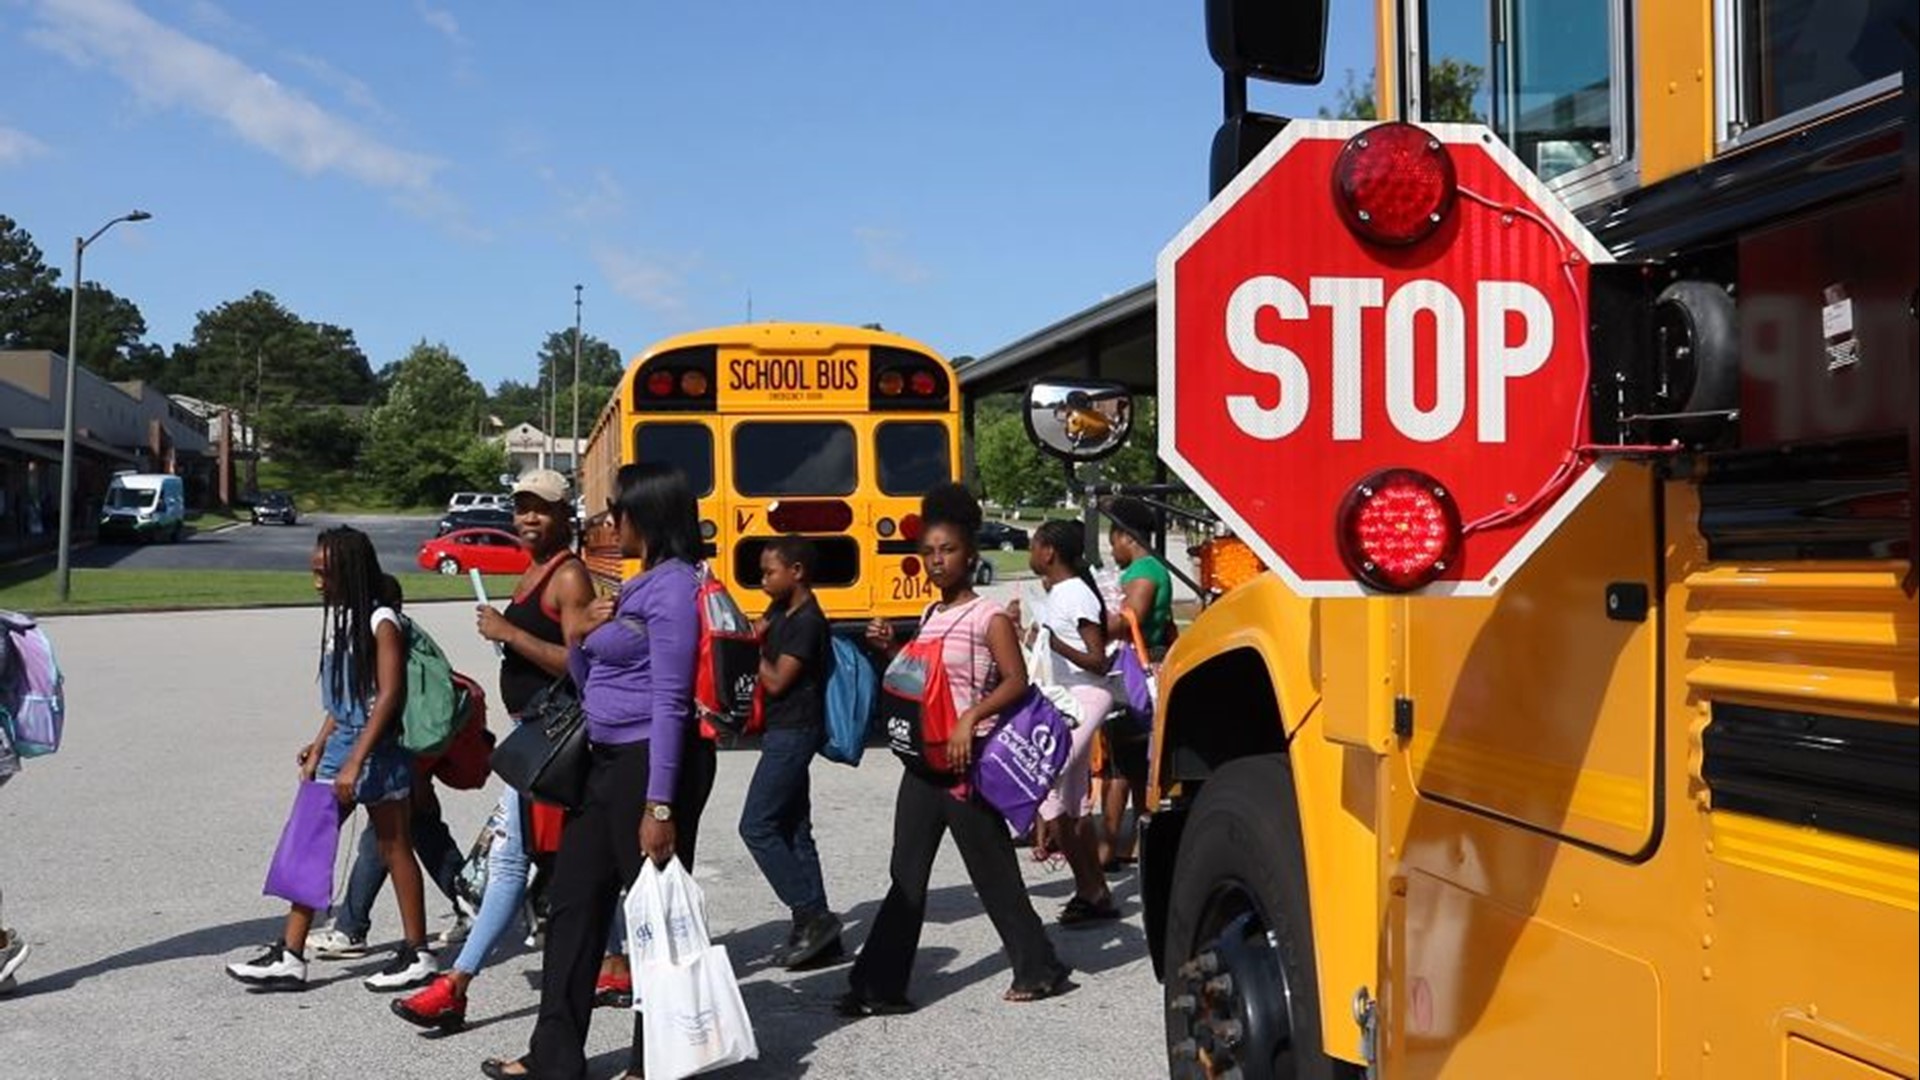 On August 1, over 155 school buses will be out on the roads